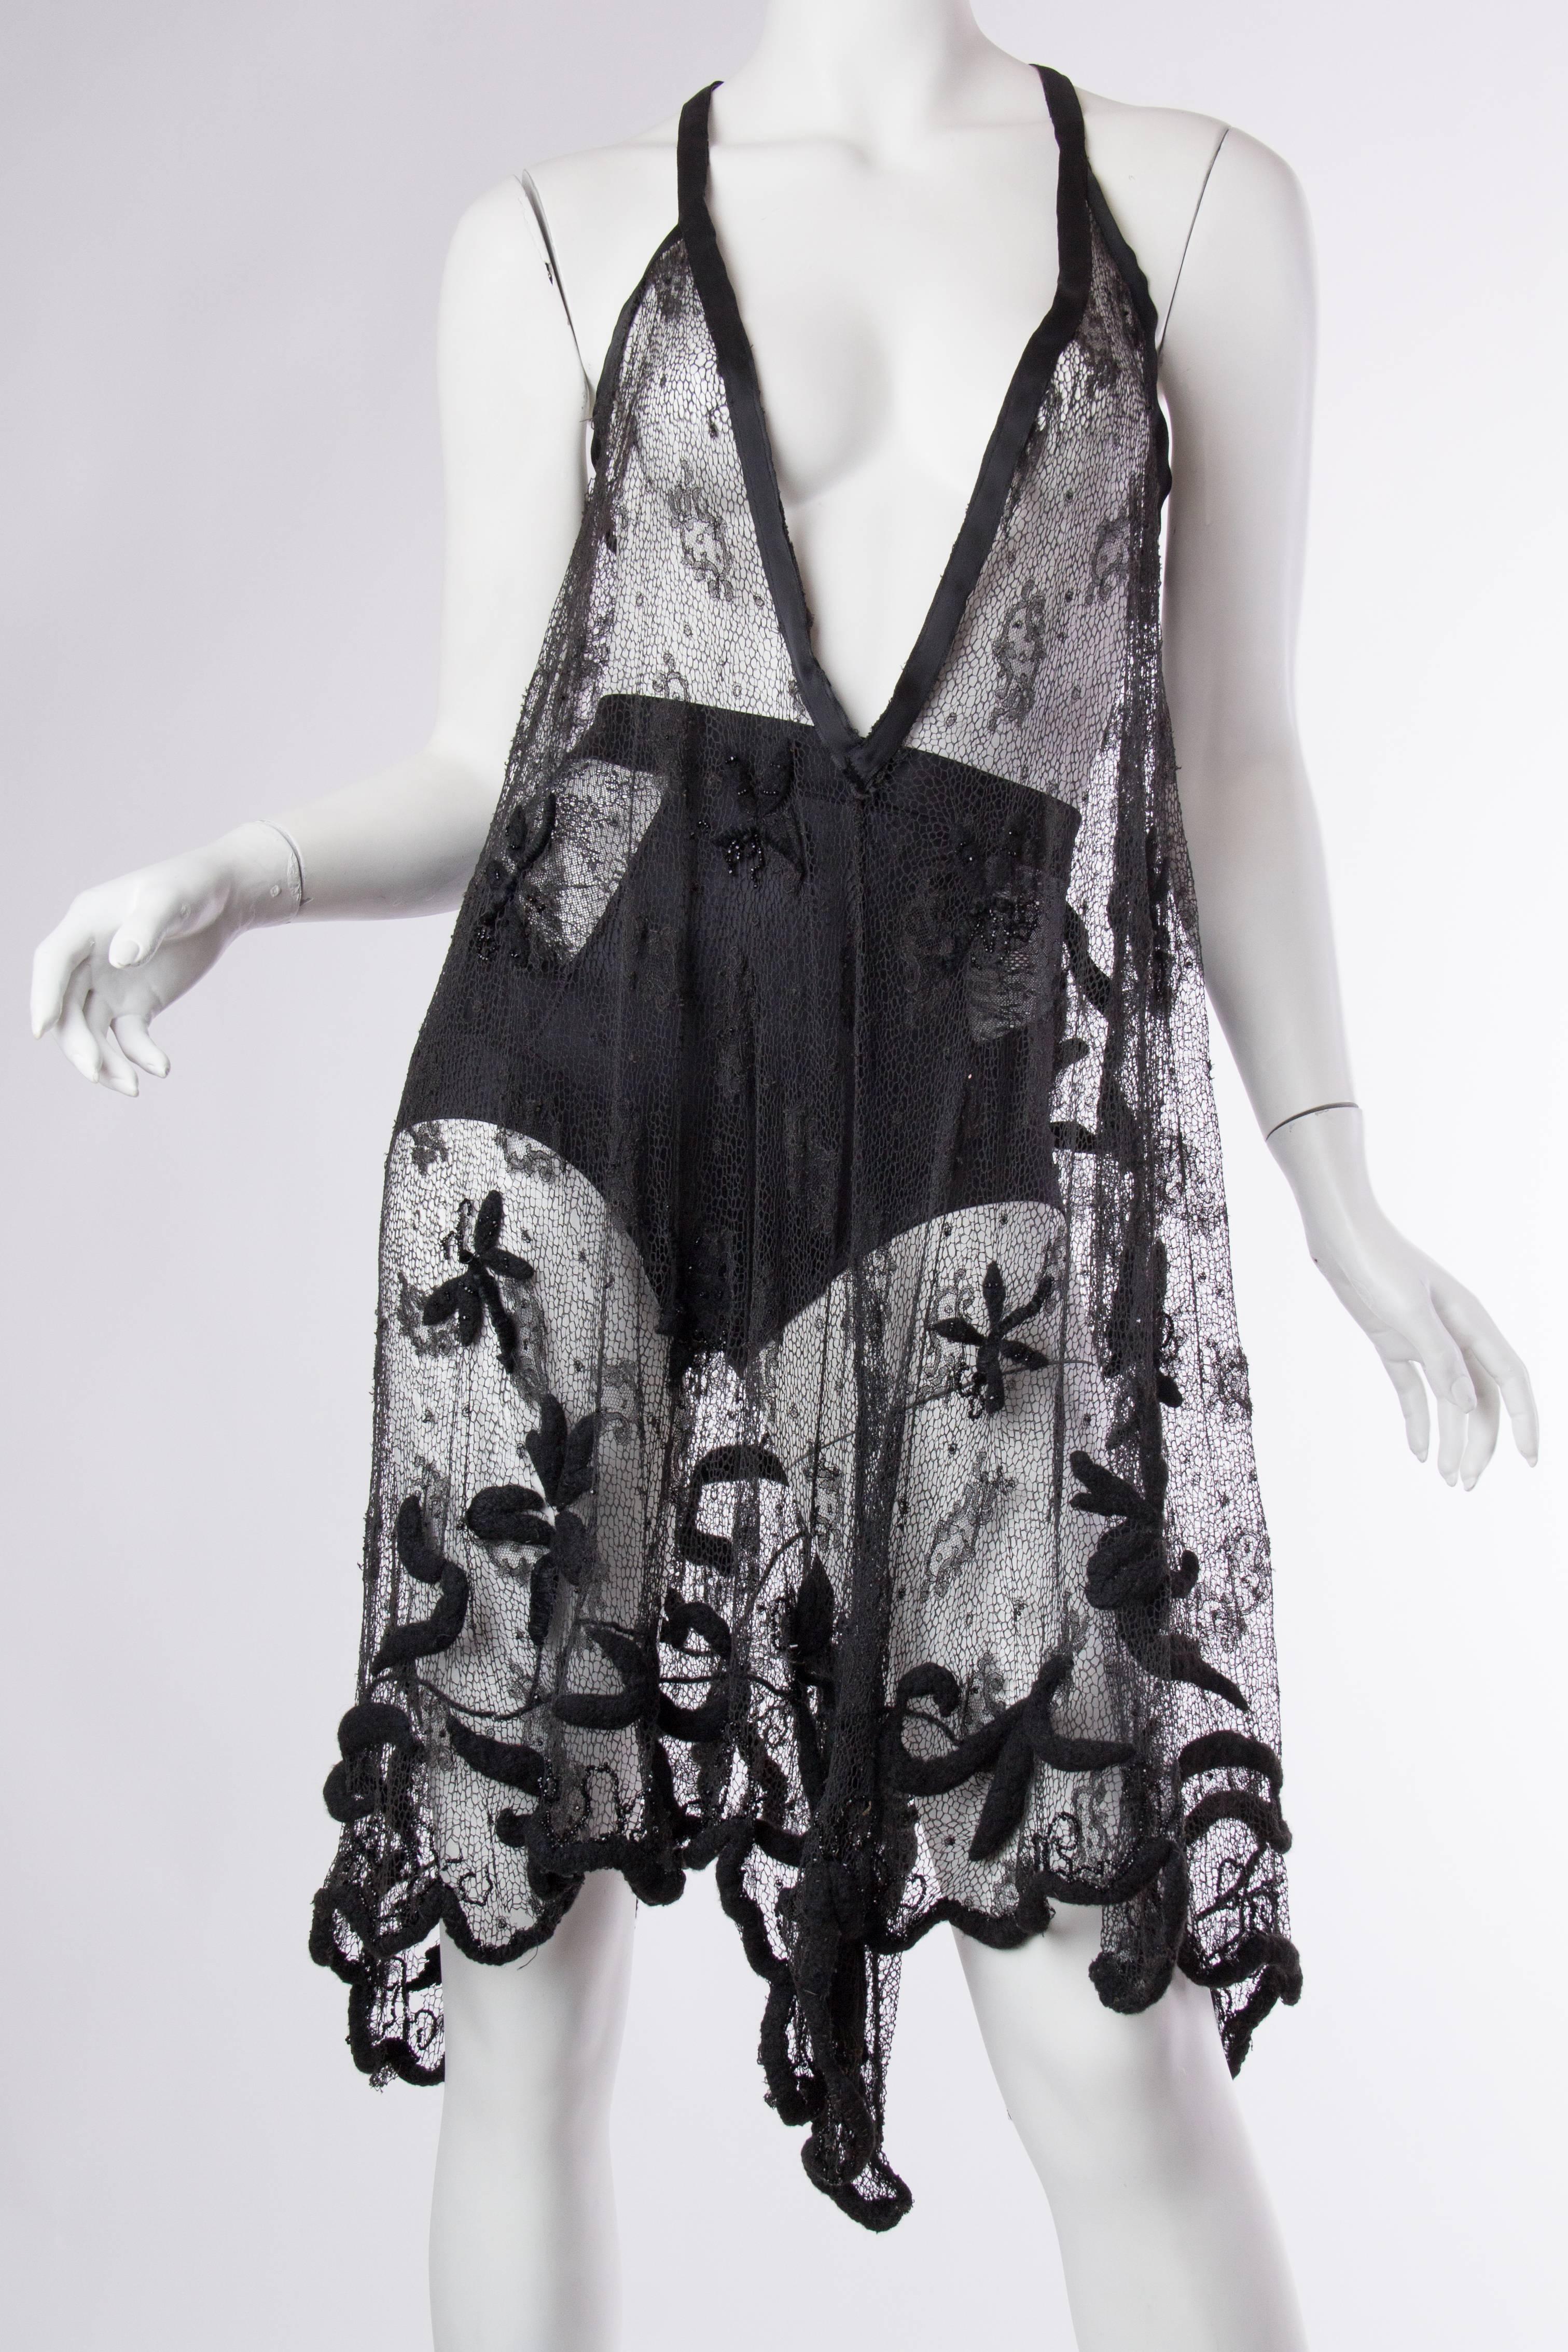 Reversible Dress made from Victorian Lace with amazing 3-d embroidery of art nouveau dragonflys.